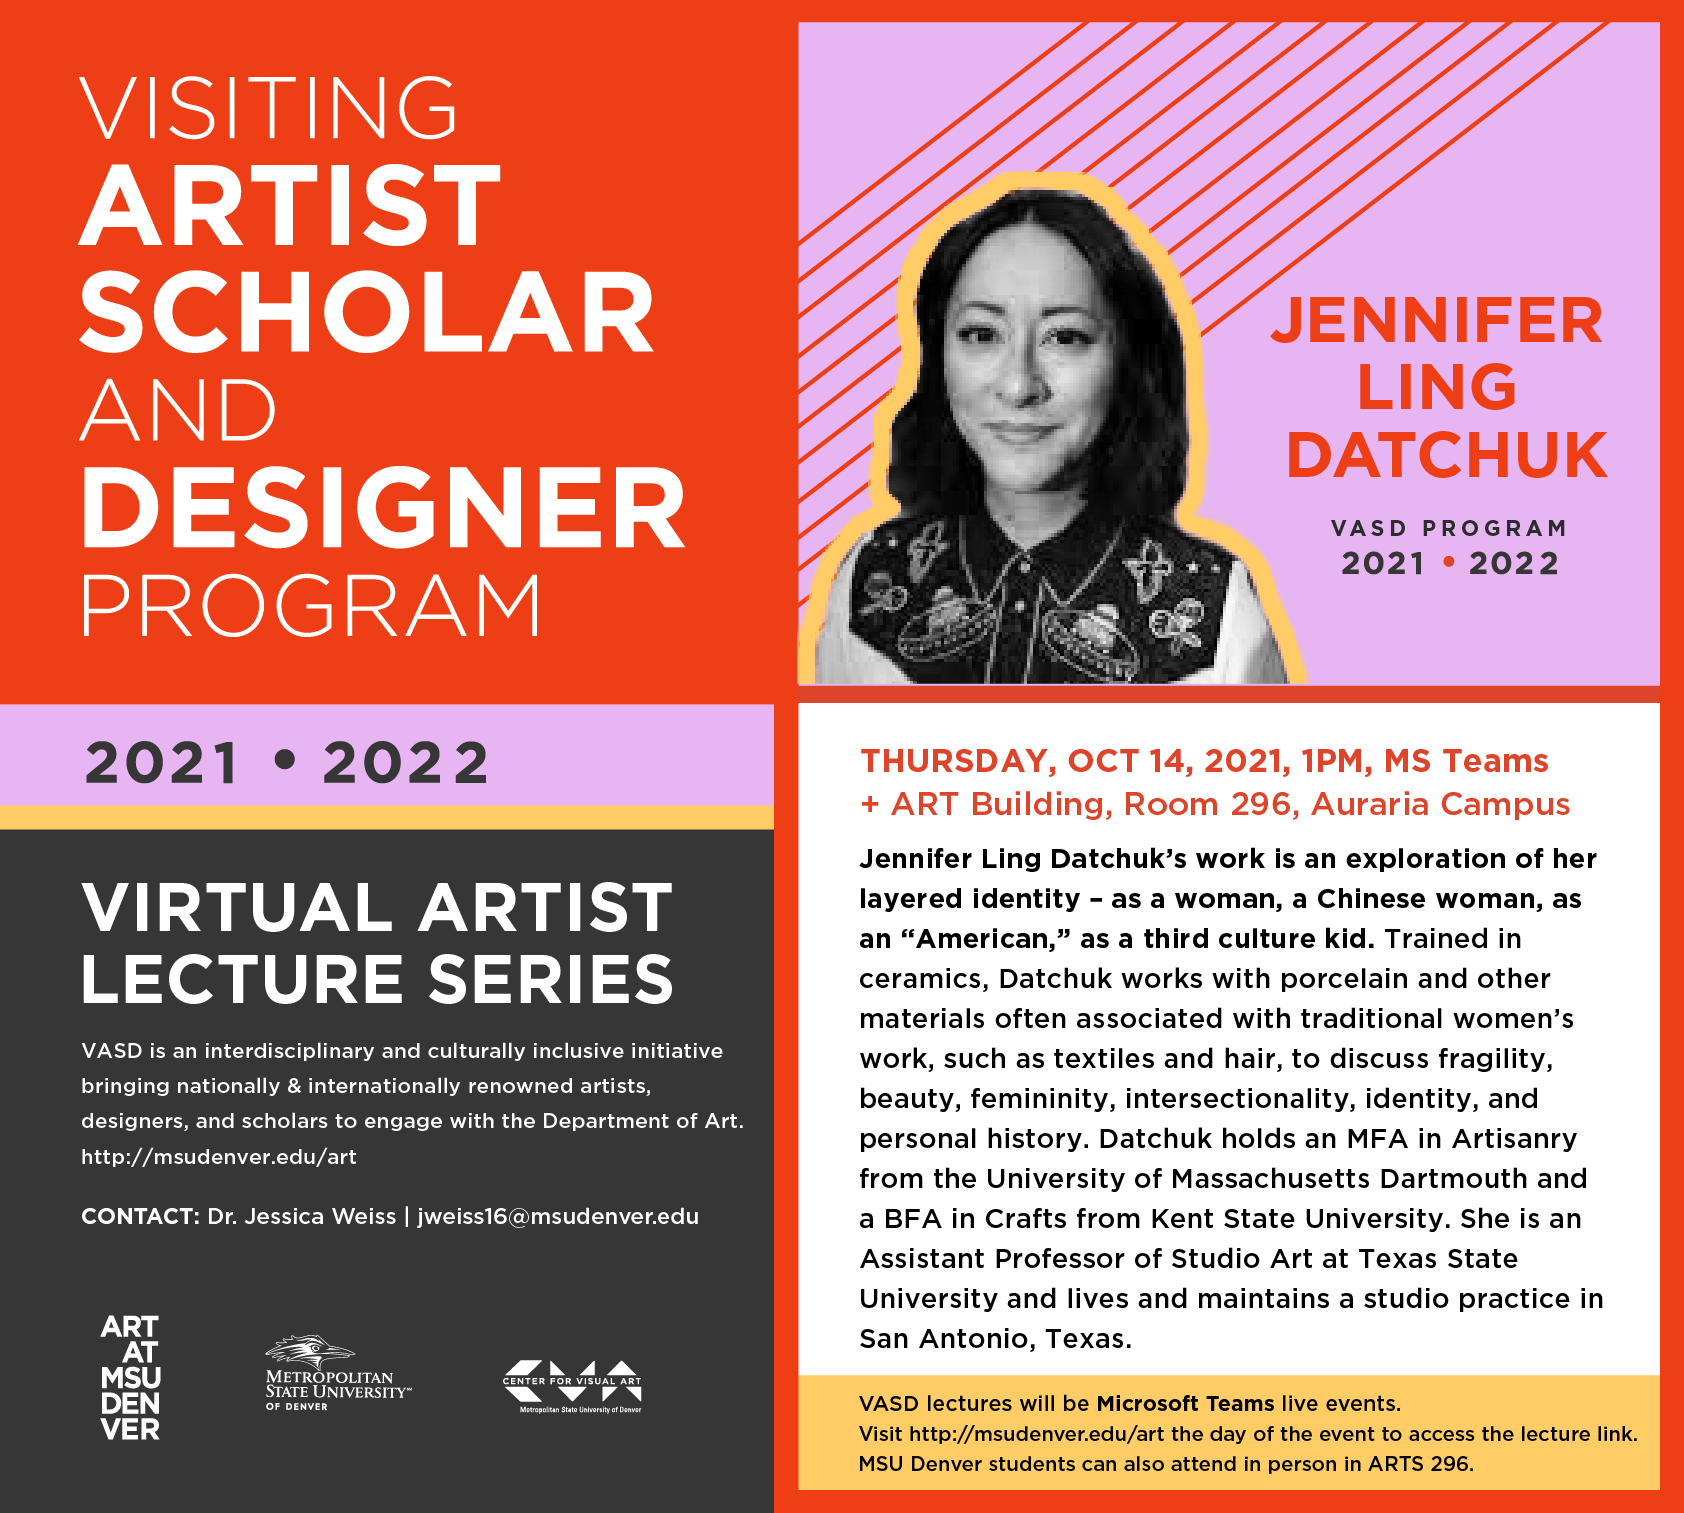 THURSDAY, OCT 14, 2021, 1PM Jennifer Ling Datchuk’s work is an exploration of her layered identity – as a woman, a Chinese woman, as an “American,” as a third culture kid.